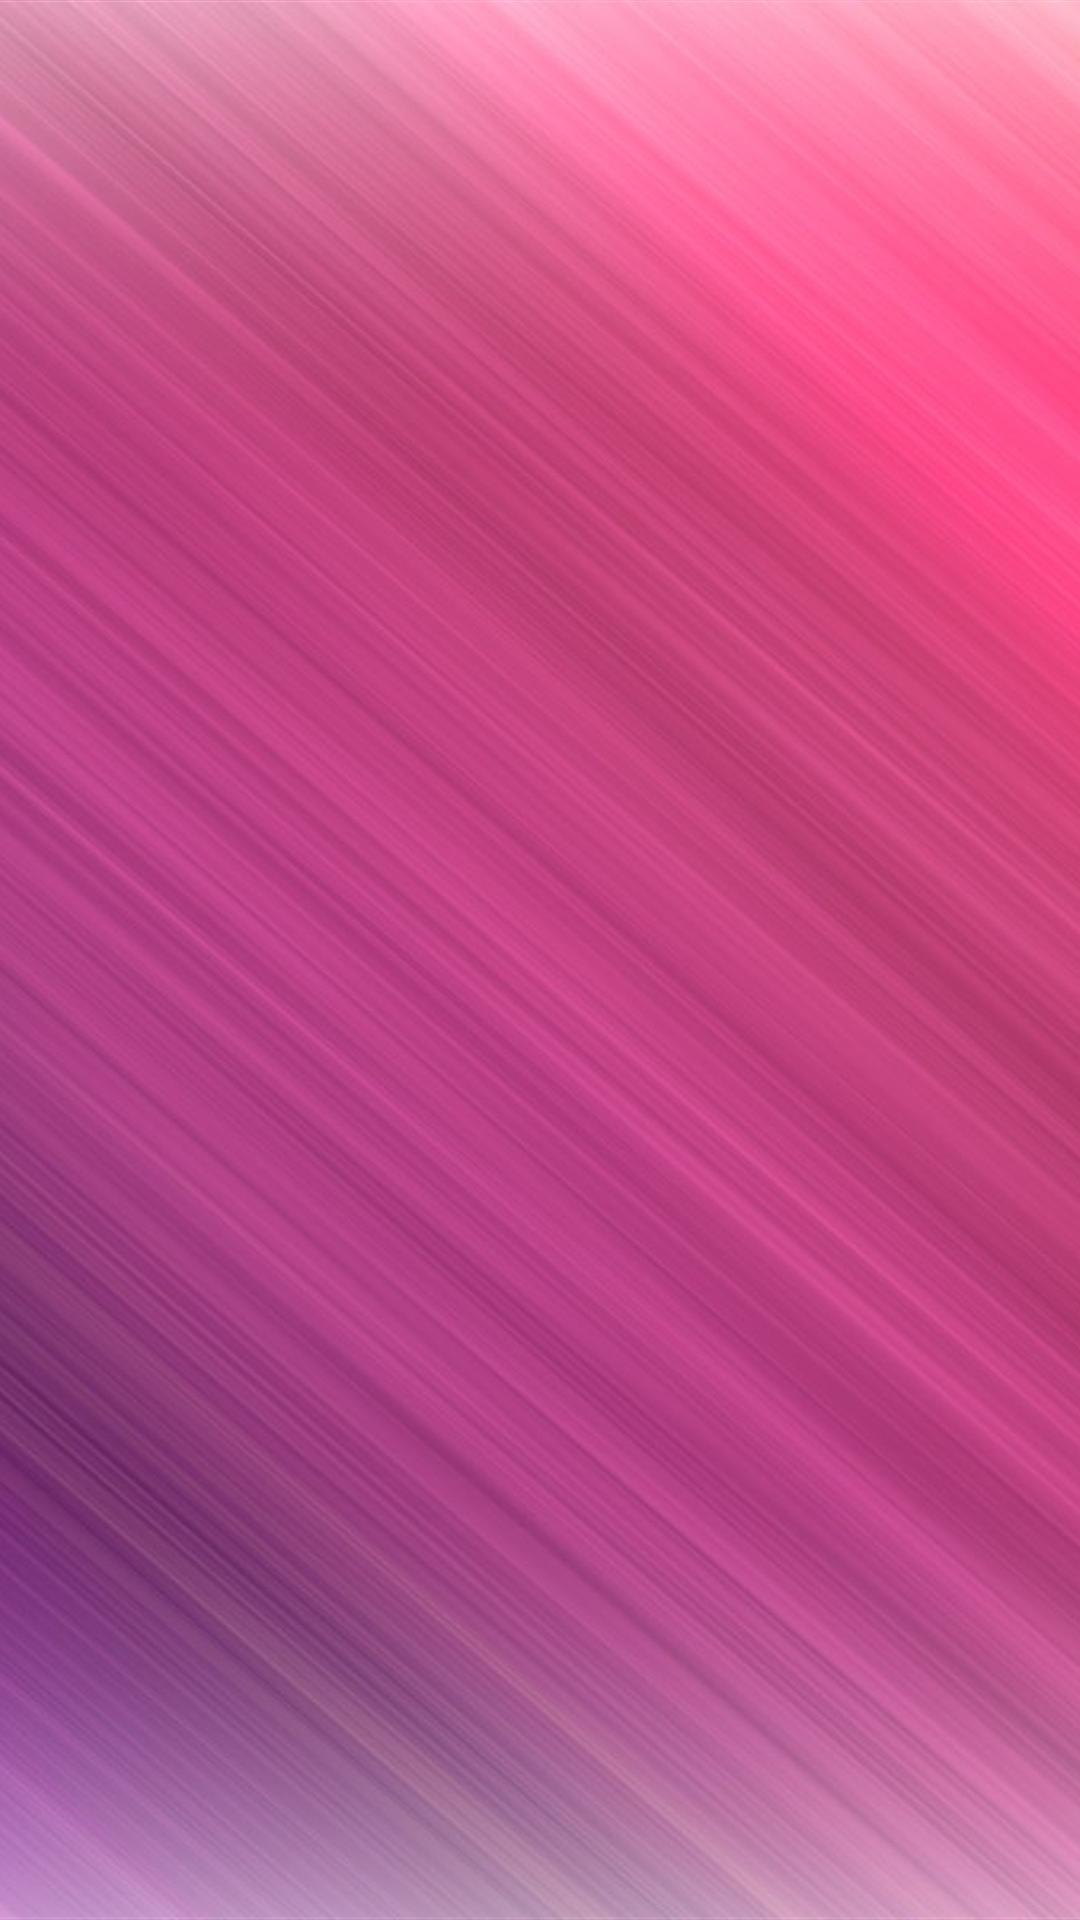 Abstract Iphone 6 Plus Resolution Images - New Wallpapers For Iphone 6 Plus Pink , HD Wallpaper & Backgrounds